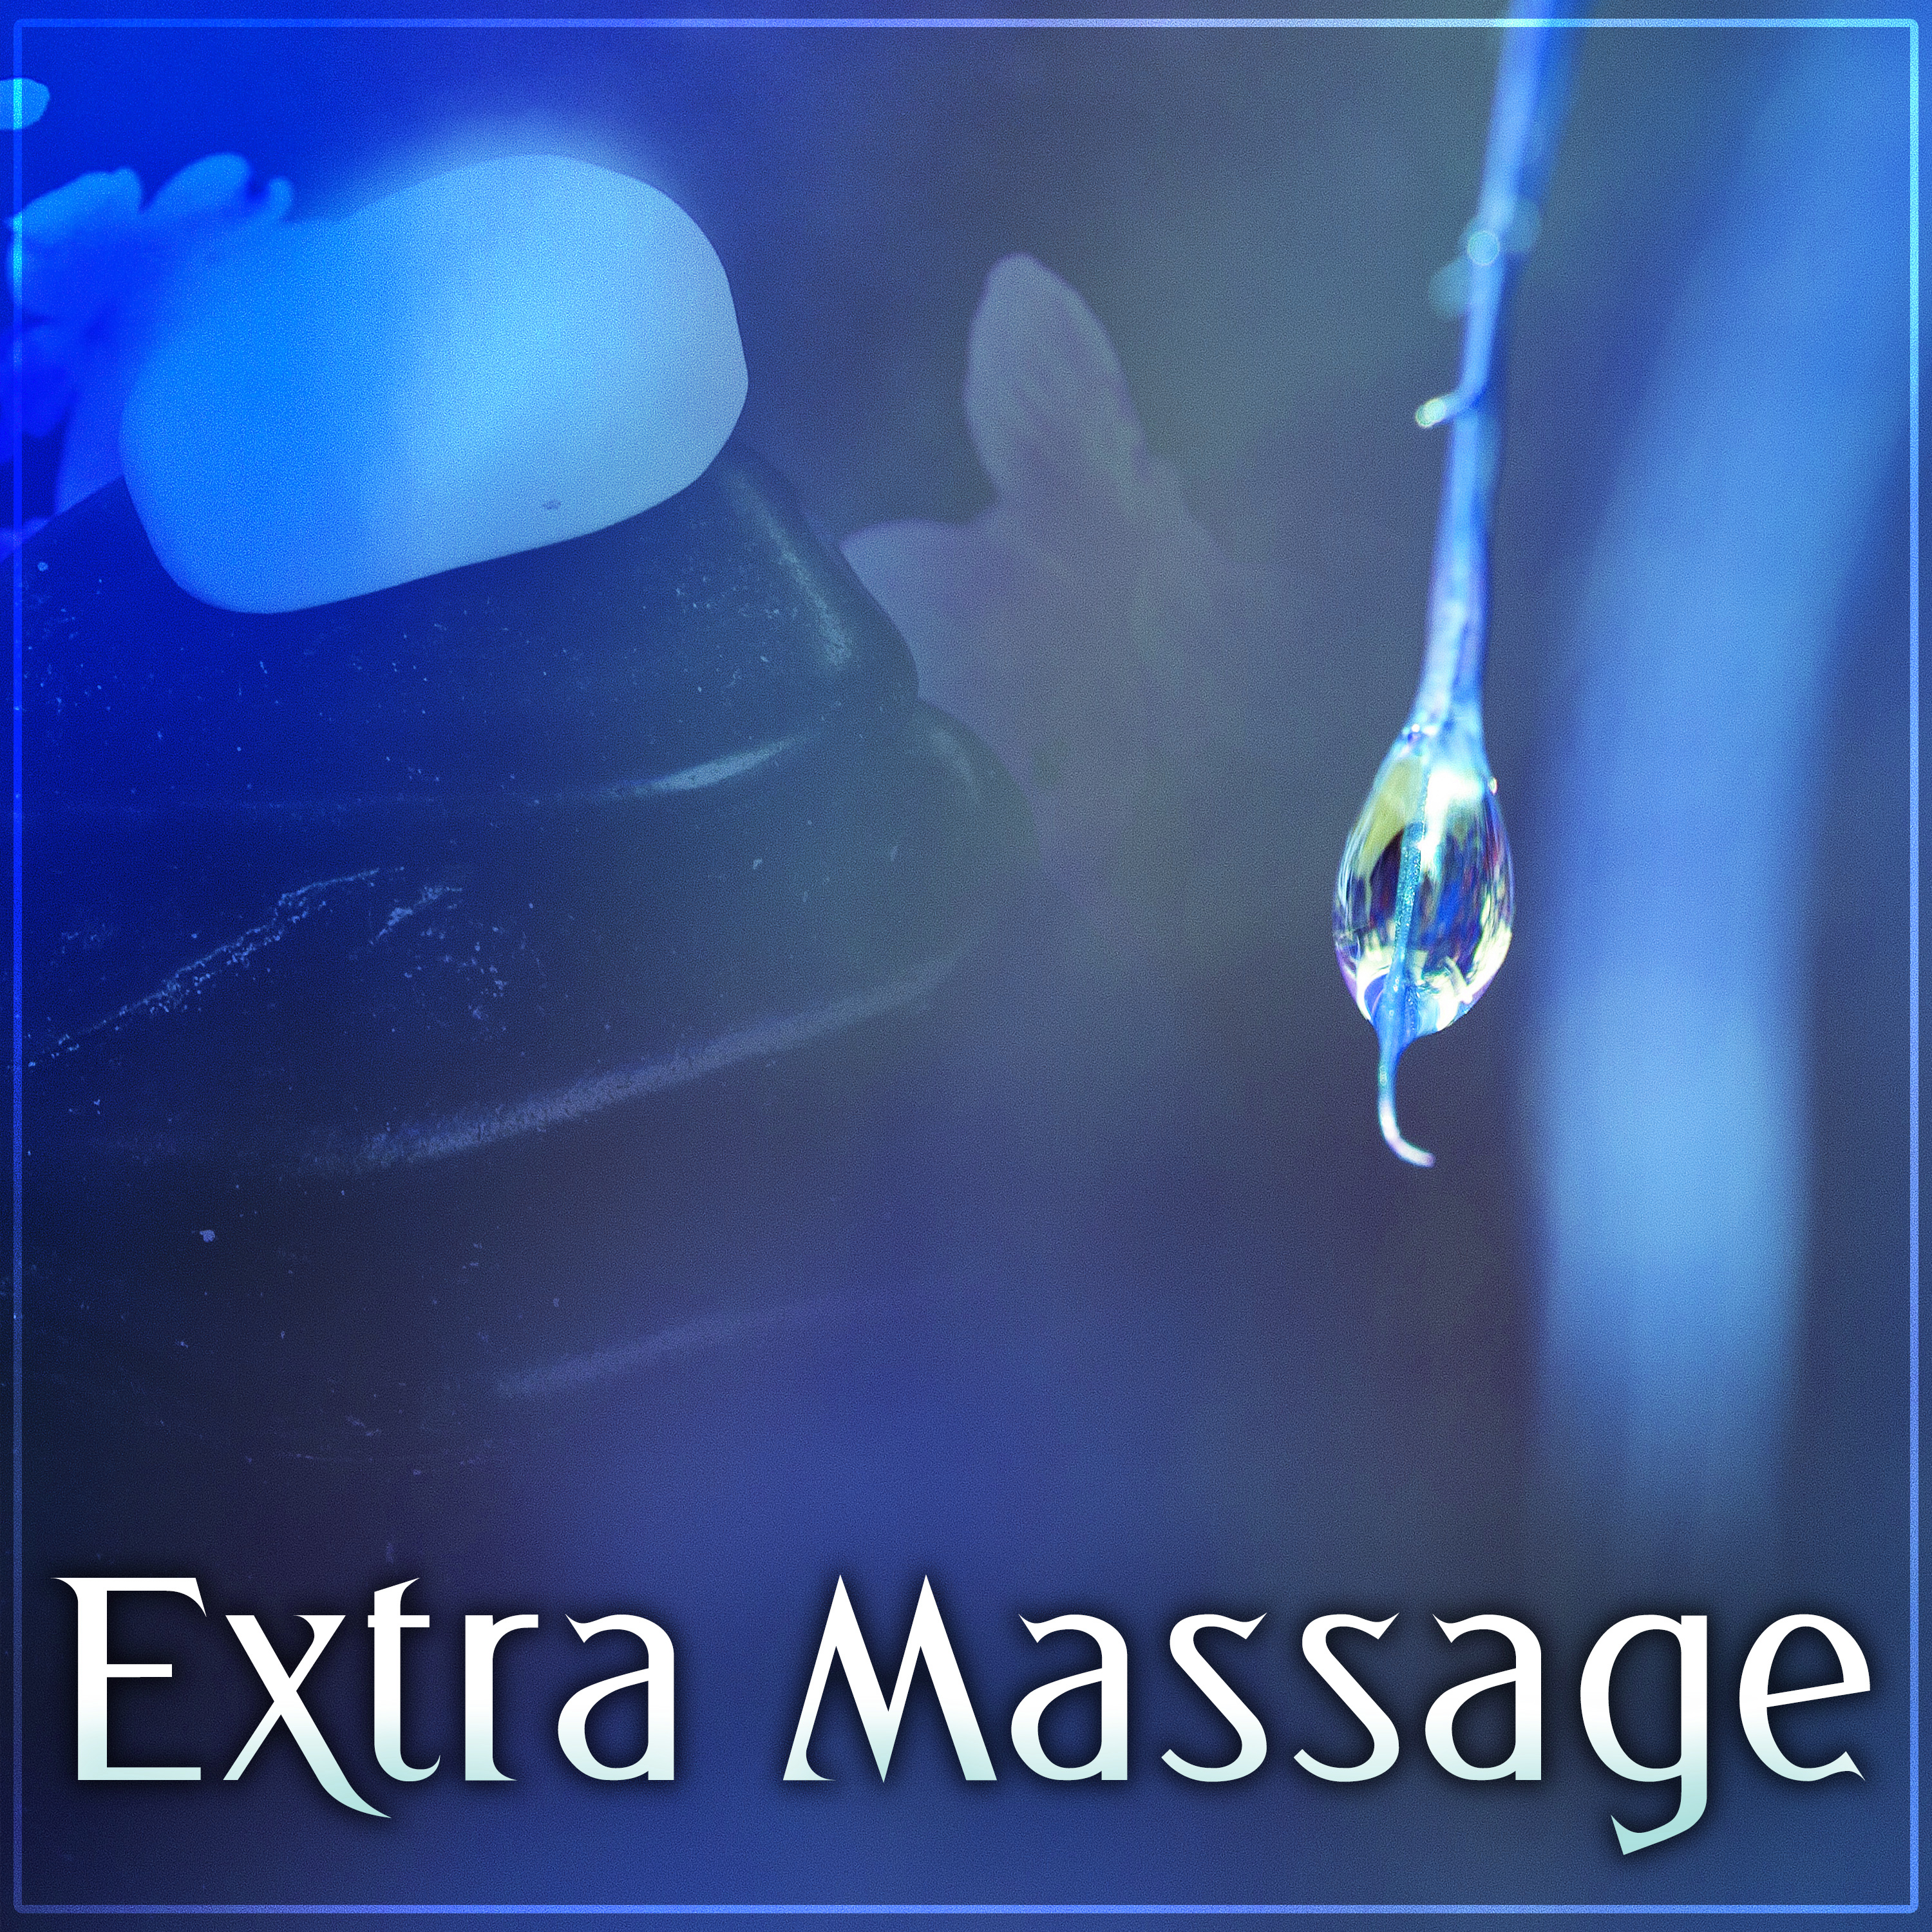 Extra Massage  Peaceful Sounds for Spa  Wellness, Relaxation Massage, Classic Massage, Chocolate Massage, Hot Stone Massage, Pure Relaxation Music, Nature Sounds and Spa Dreams